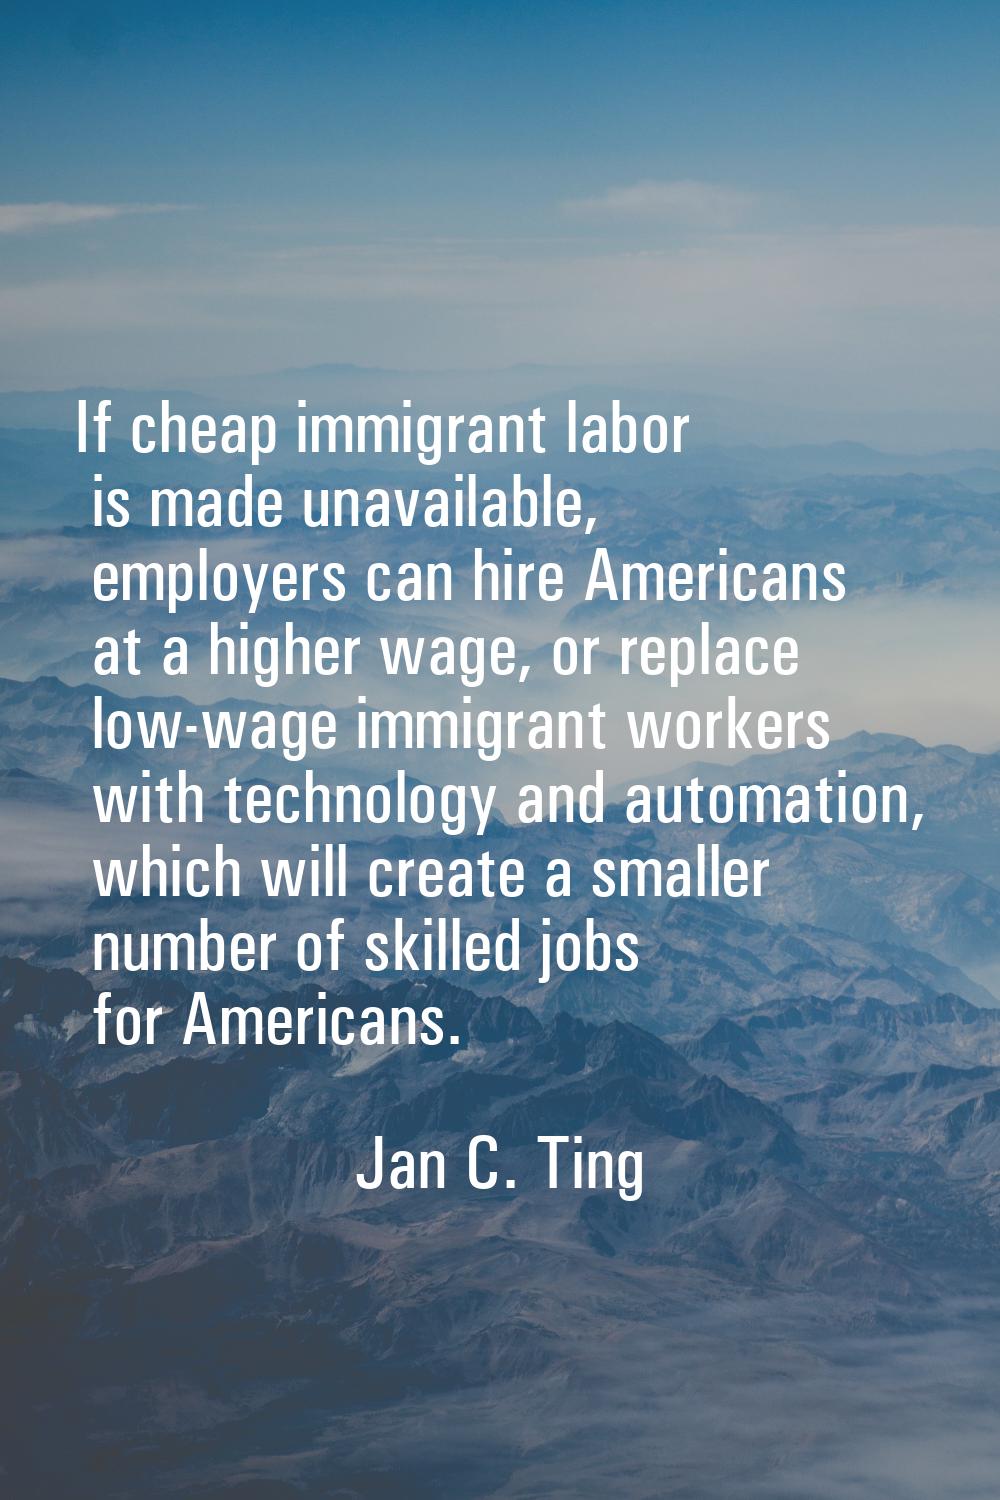 If cheap immigrant labor is made unavailable, employers can hire Americans at a higher wage, or rep